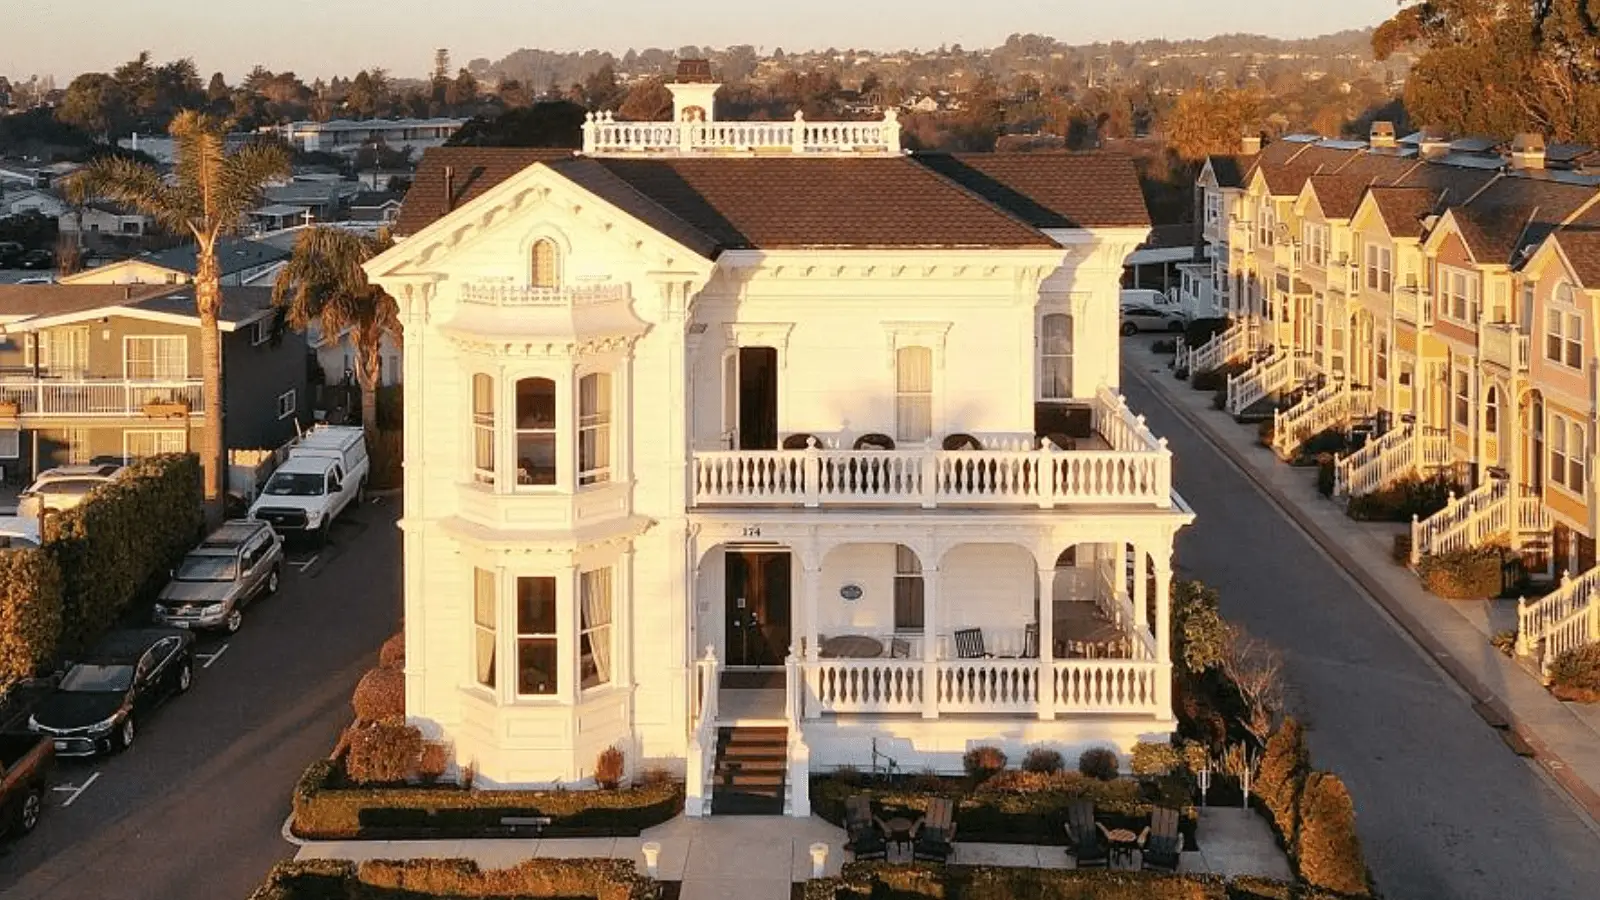 Exterior of the large white Victorian bed & breakfast, West Cliff Inn in Santa Cruz, California